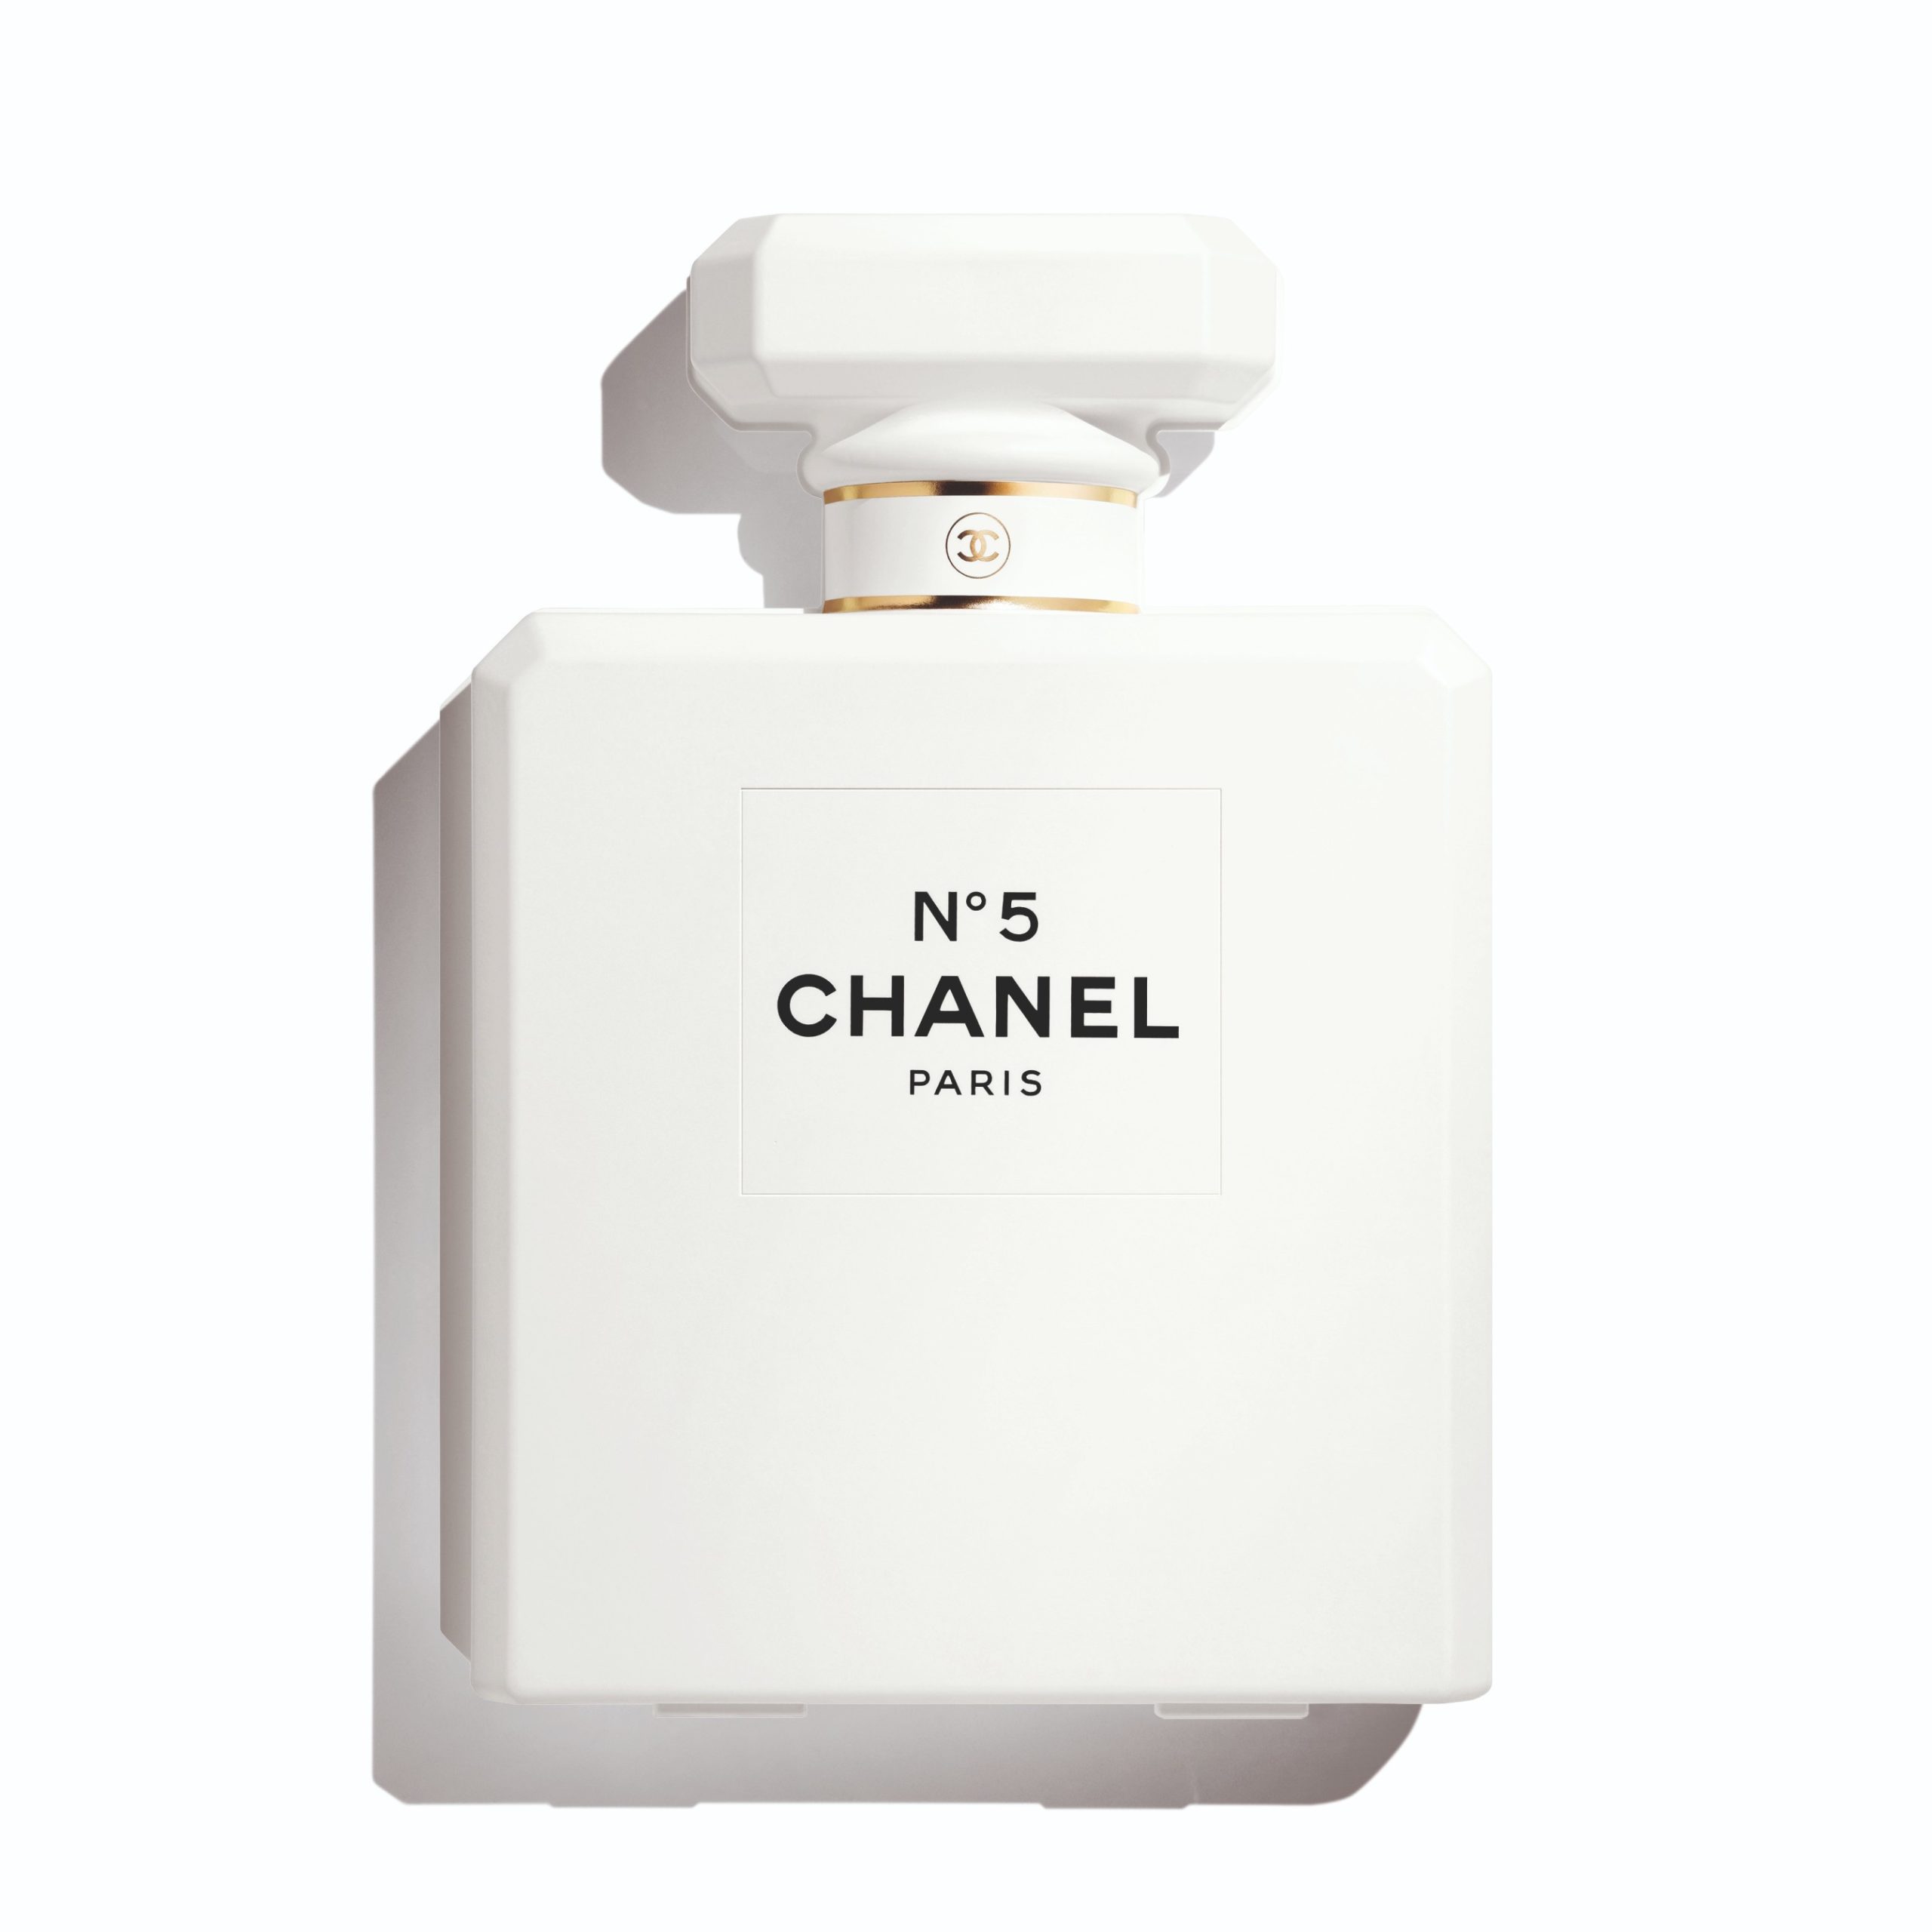 Chanel's Holiday 2021 Fragrance Collection is Perfect For The Gift